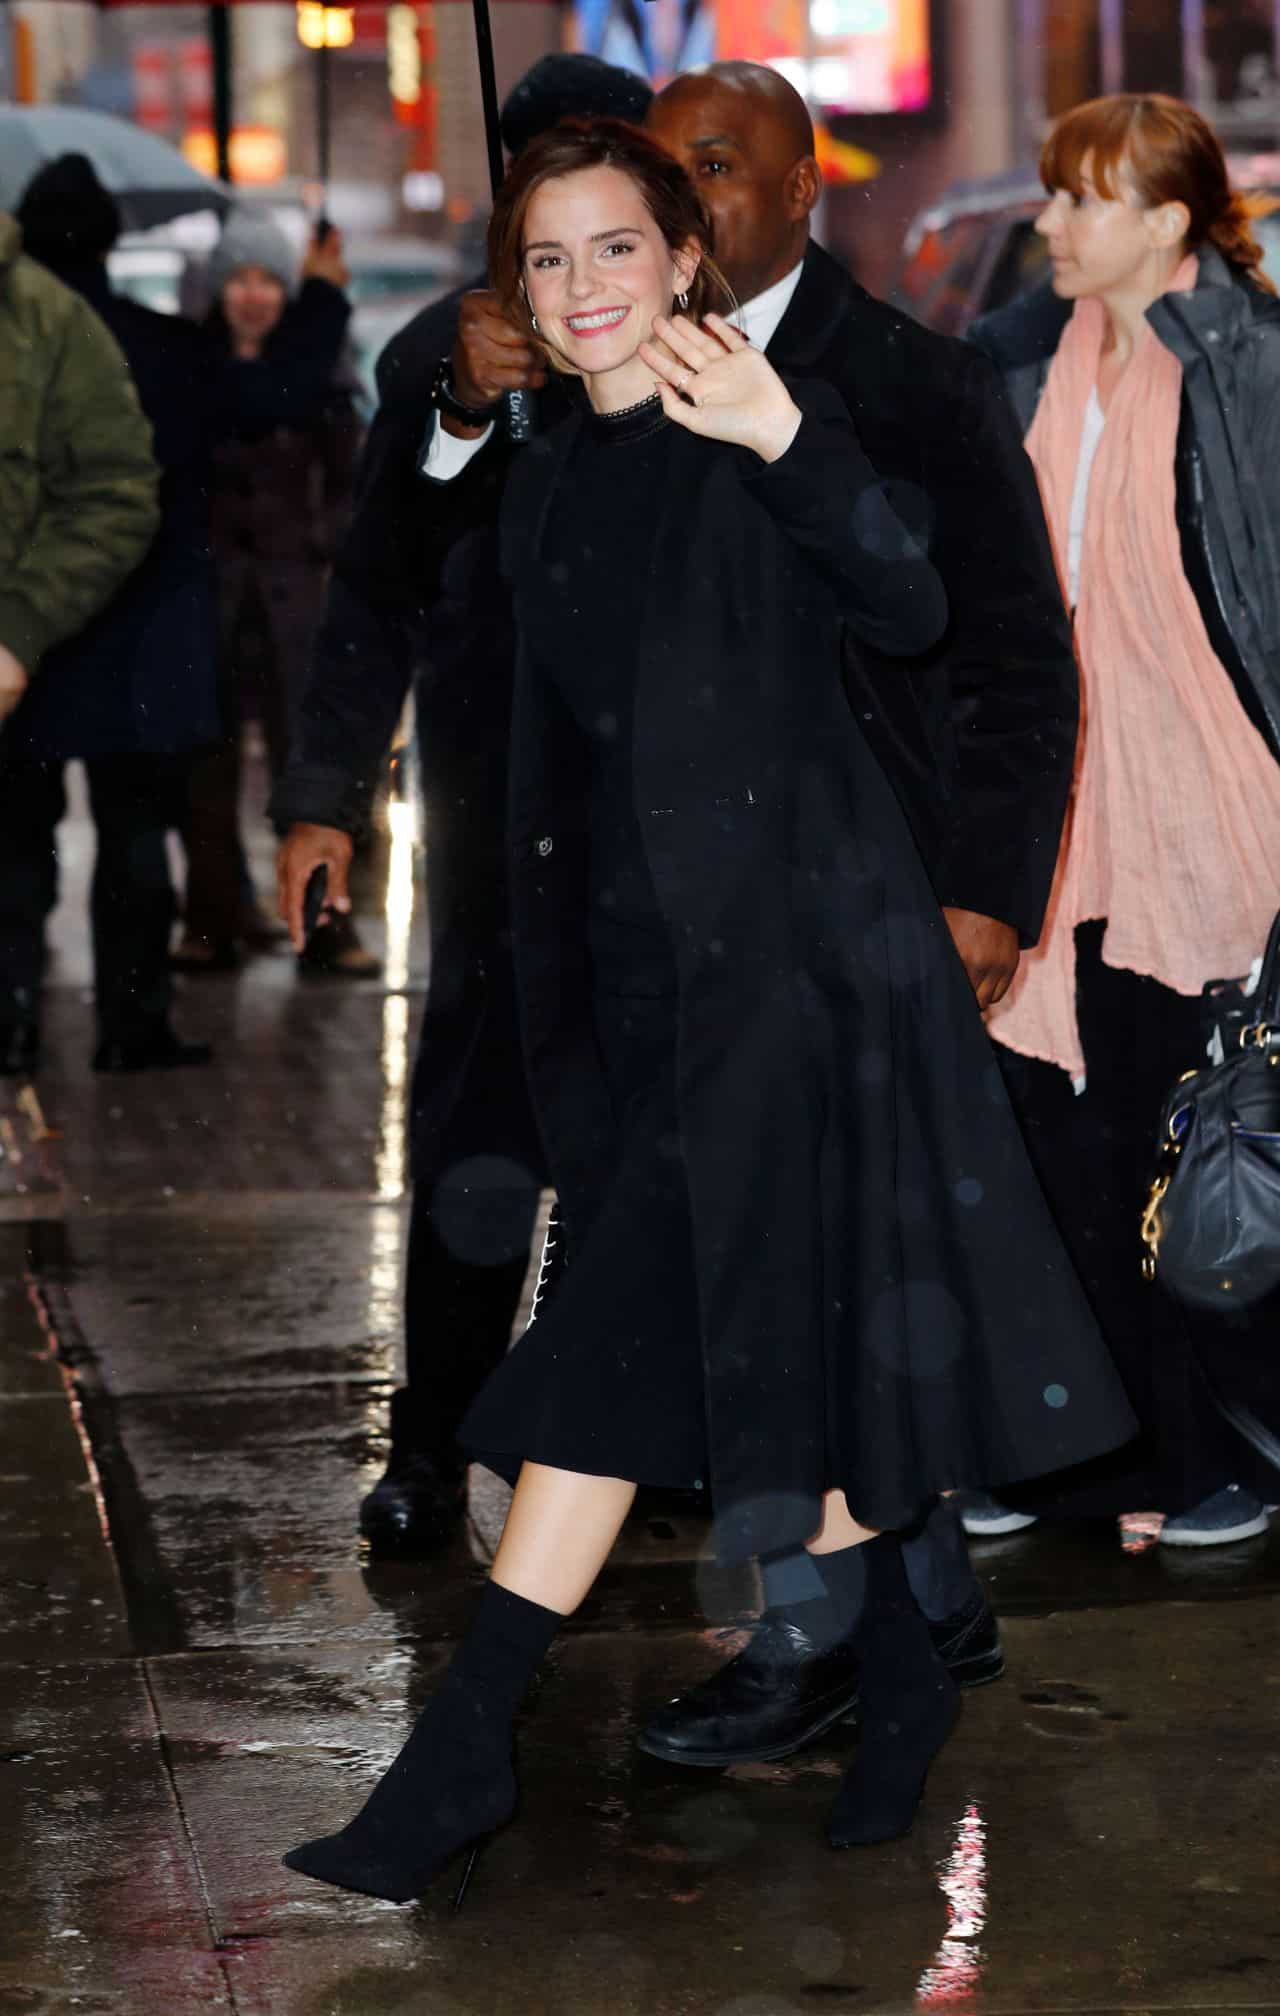 Emma Watson Arrives at “Good Morning America” TV Show in NYC